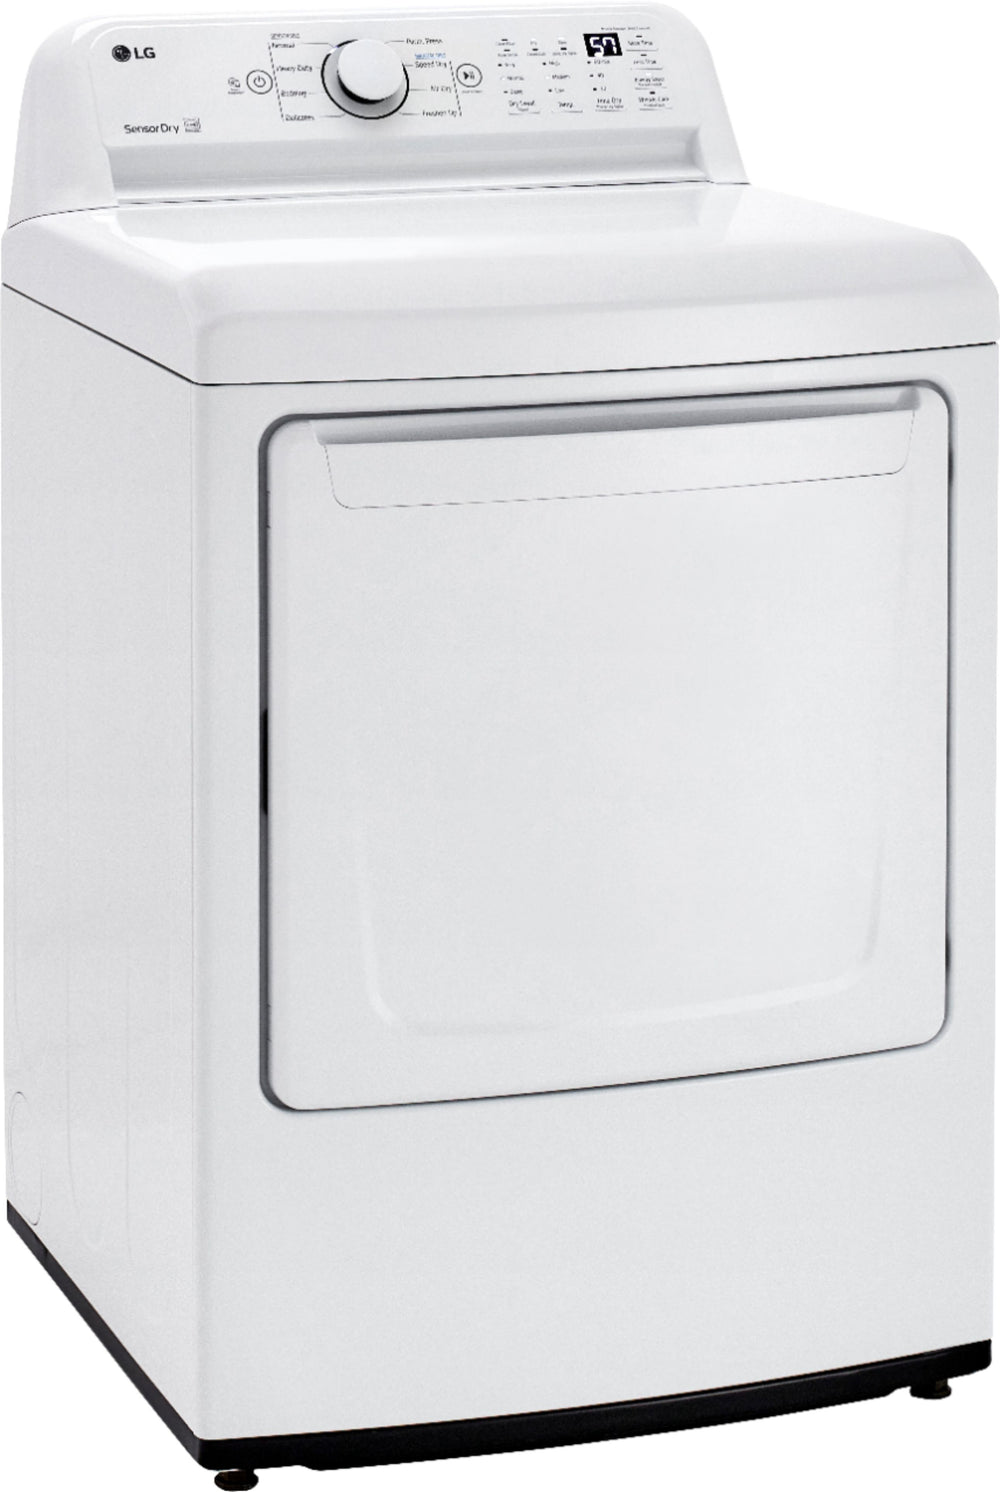 LG - 7.3 cu ft Electric Dryer with Sensor Dry - White_1